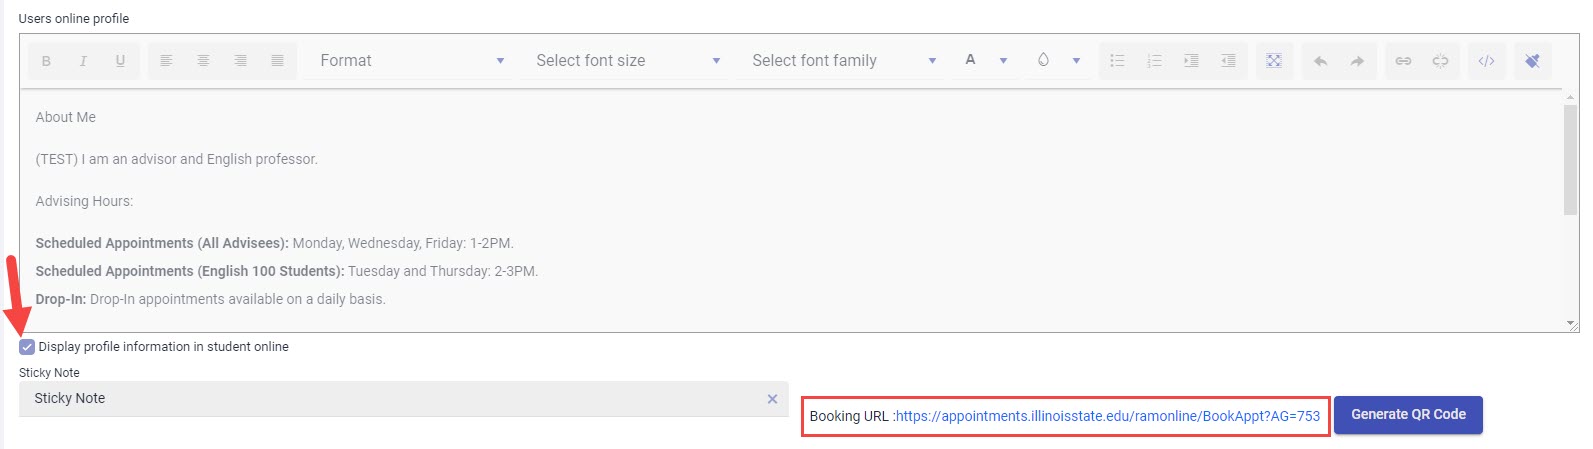 Booking URL field and Display profile information in student online link